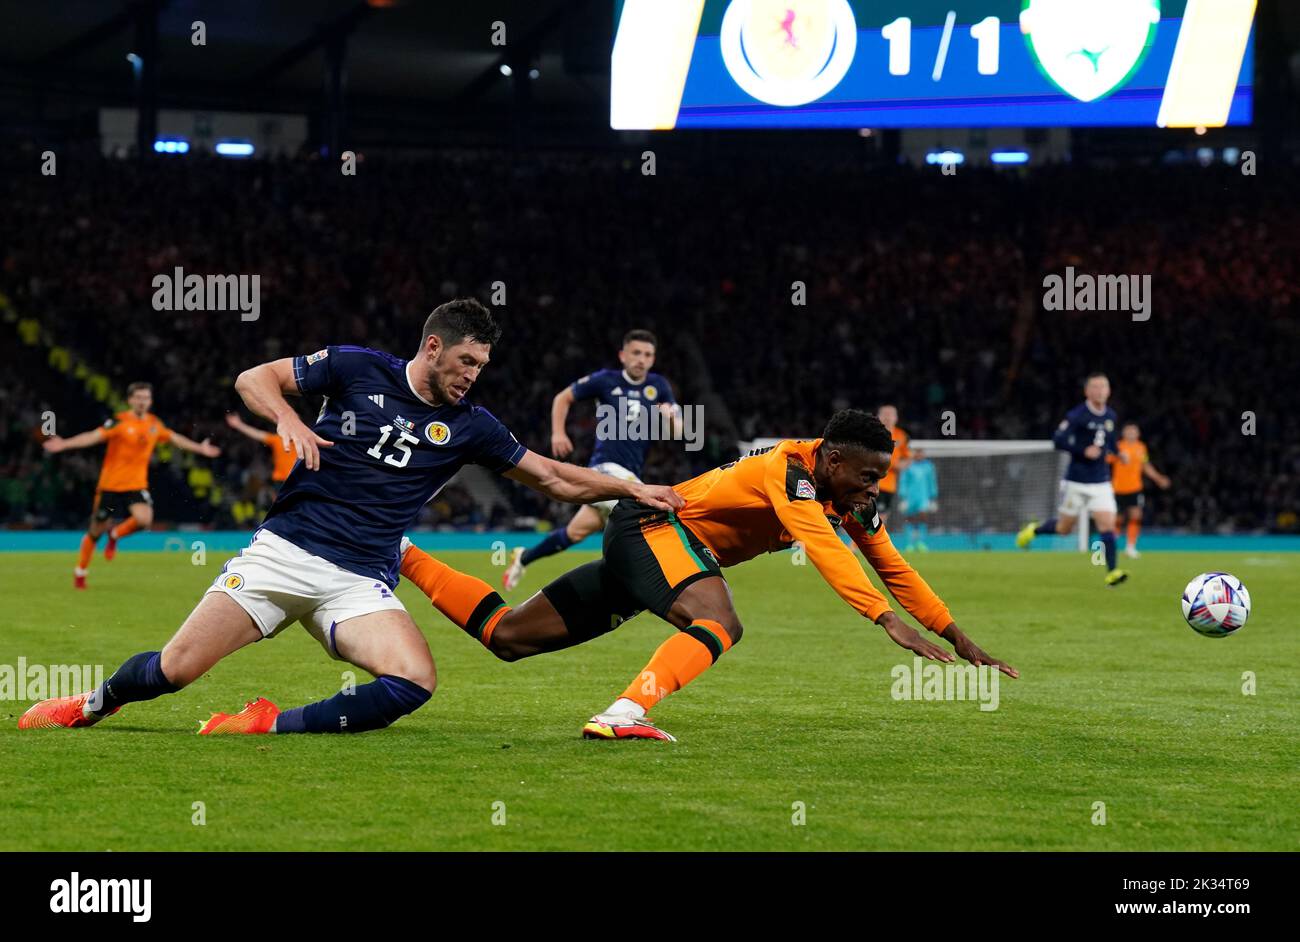 Scotland's Scott McKenna (left) fouls Republic of Ireland's Chiedozie Ogbene, for which he receives a yellow card for, during the UEFA Nations League Group E Match at Hampden Park, Glasgow. Picture date: Saturday September 24, 2022. Stock Photo